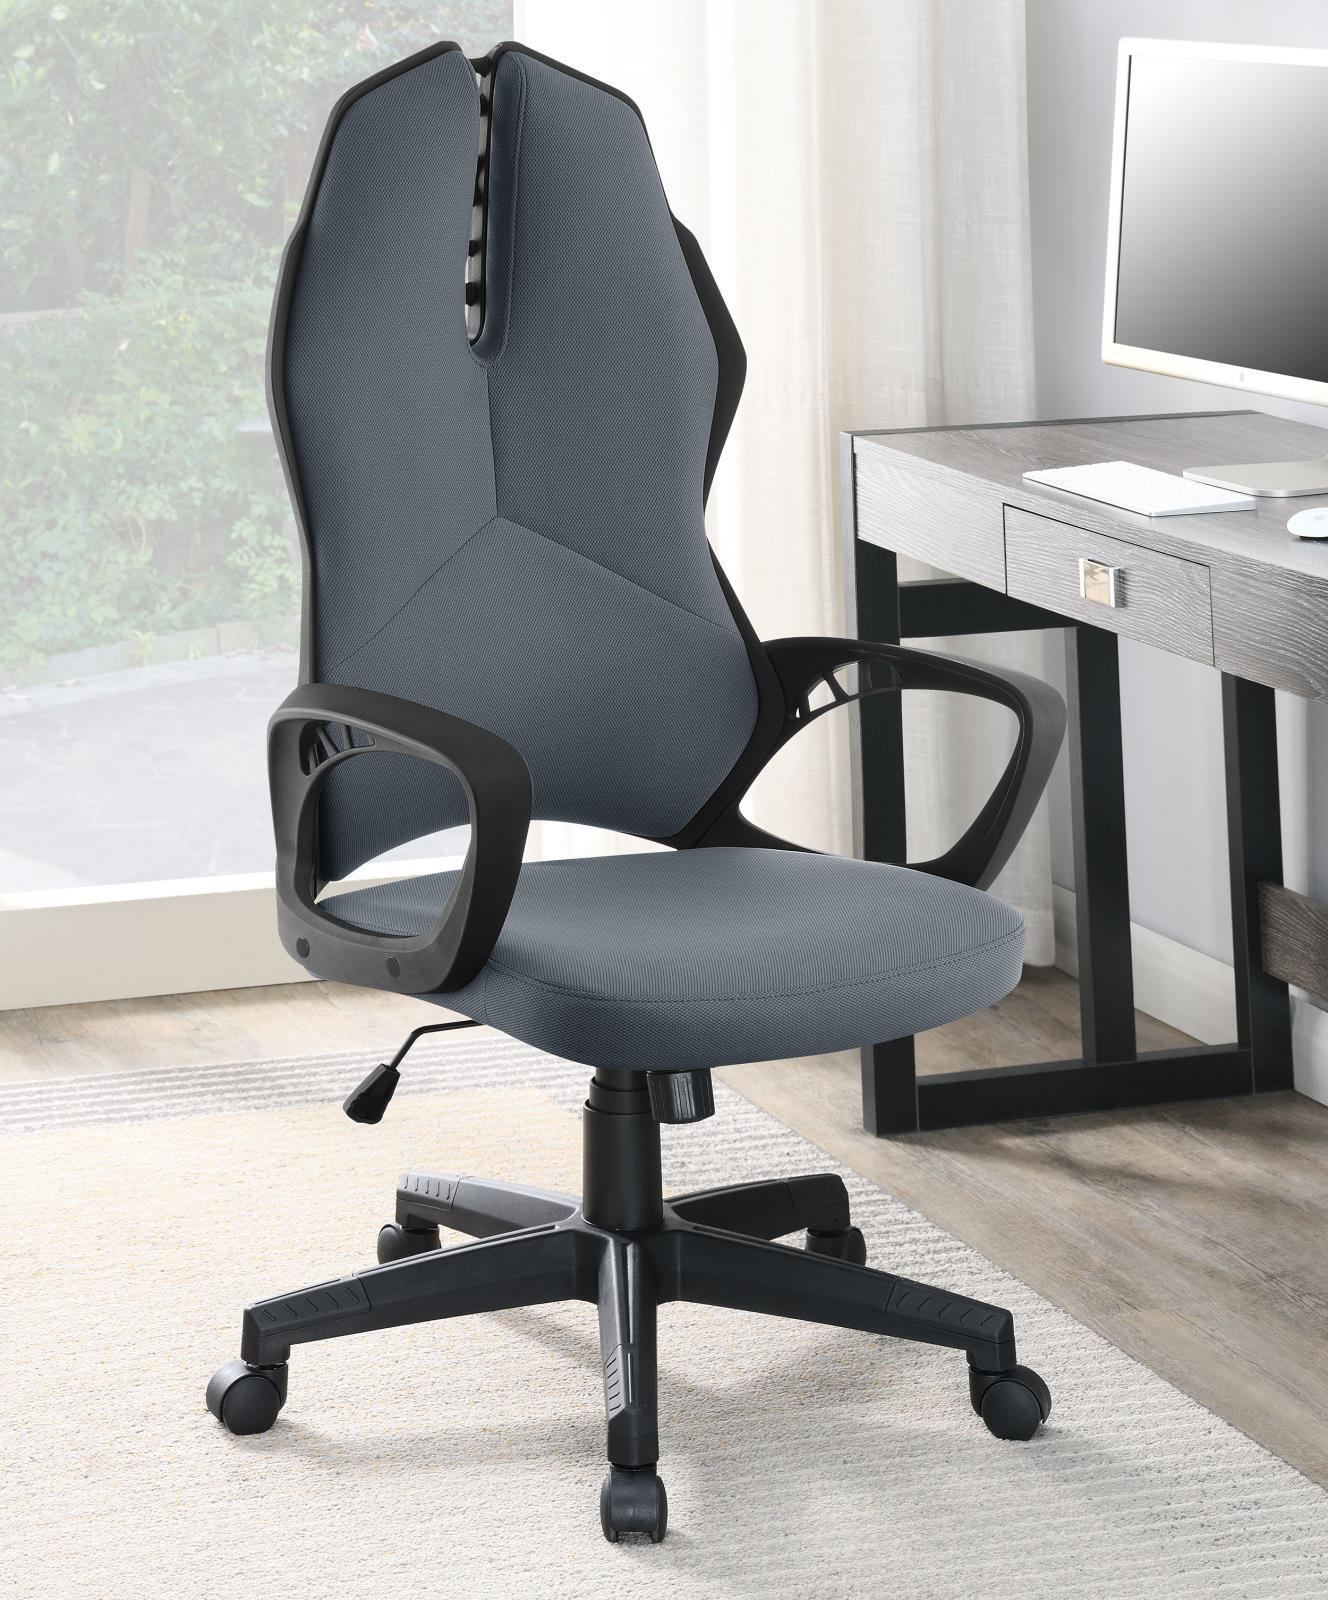 Grey Upholstered Office Chair 881366 - Ella Furniture